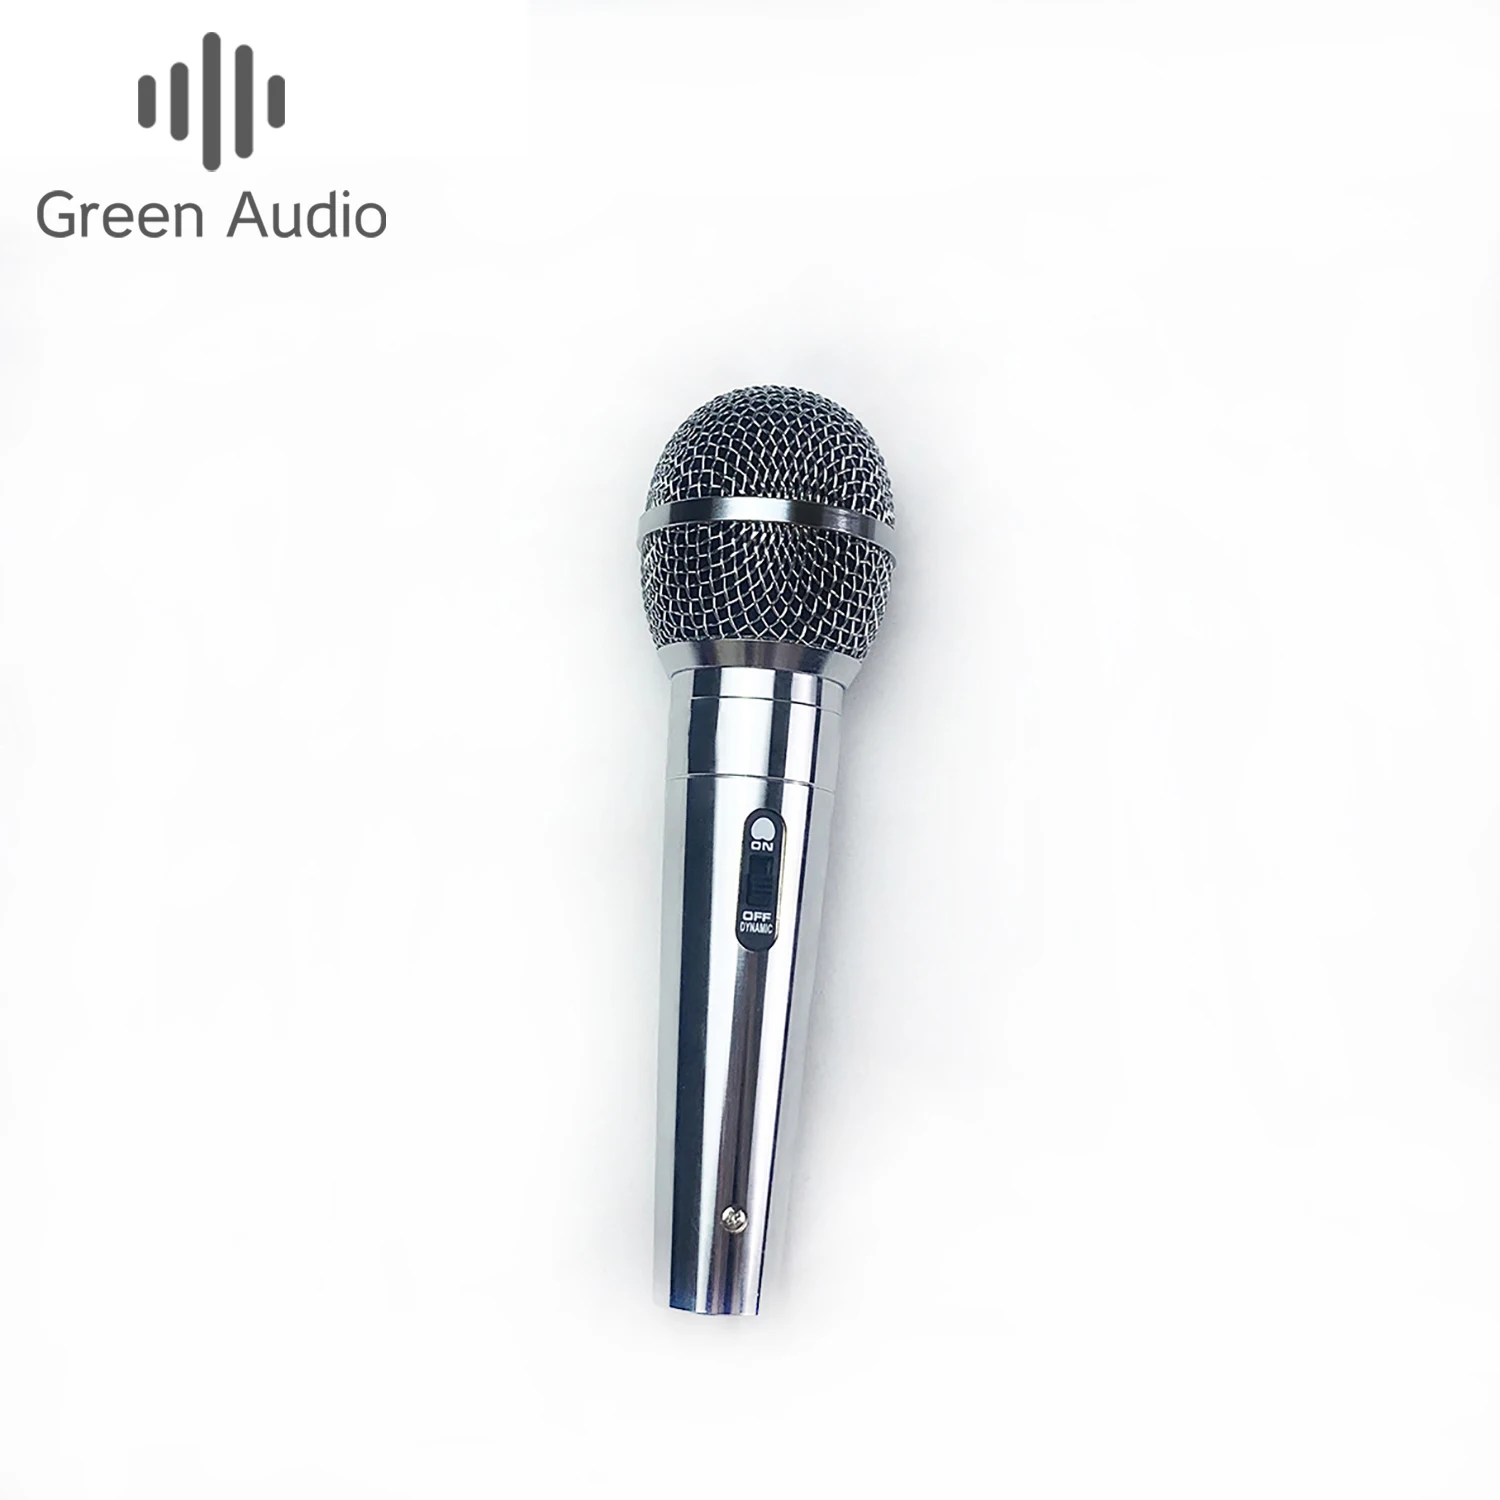 

GAM-591 Handheld Speaker Microphone Wired Dynamic Microphone KTV Conference Performance mic